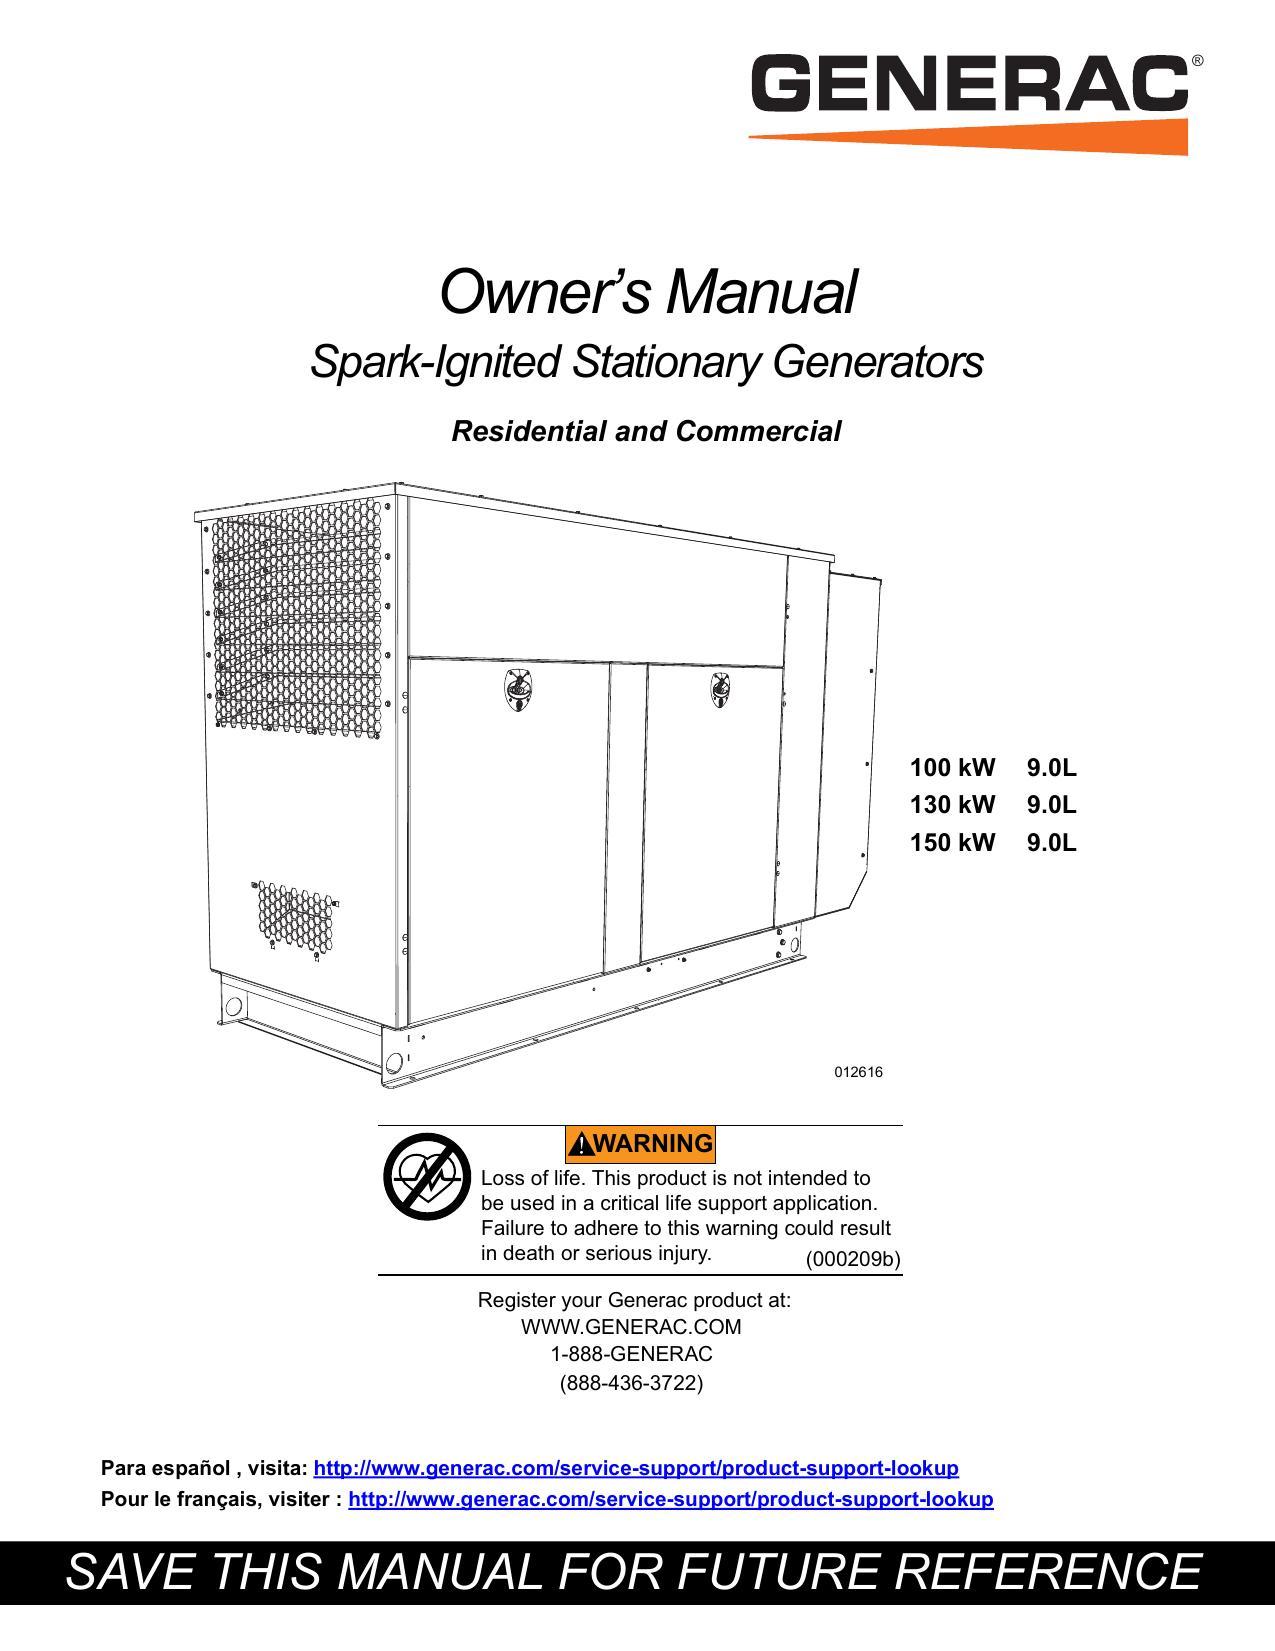 owners-manual-for-spark-ignited-stationary-generators-residential-and-commercial-100-kw-90l-130-kw-90l-150-kw-90l.pdf